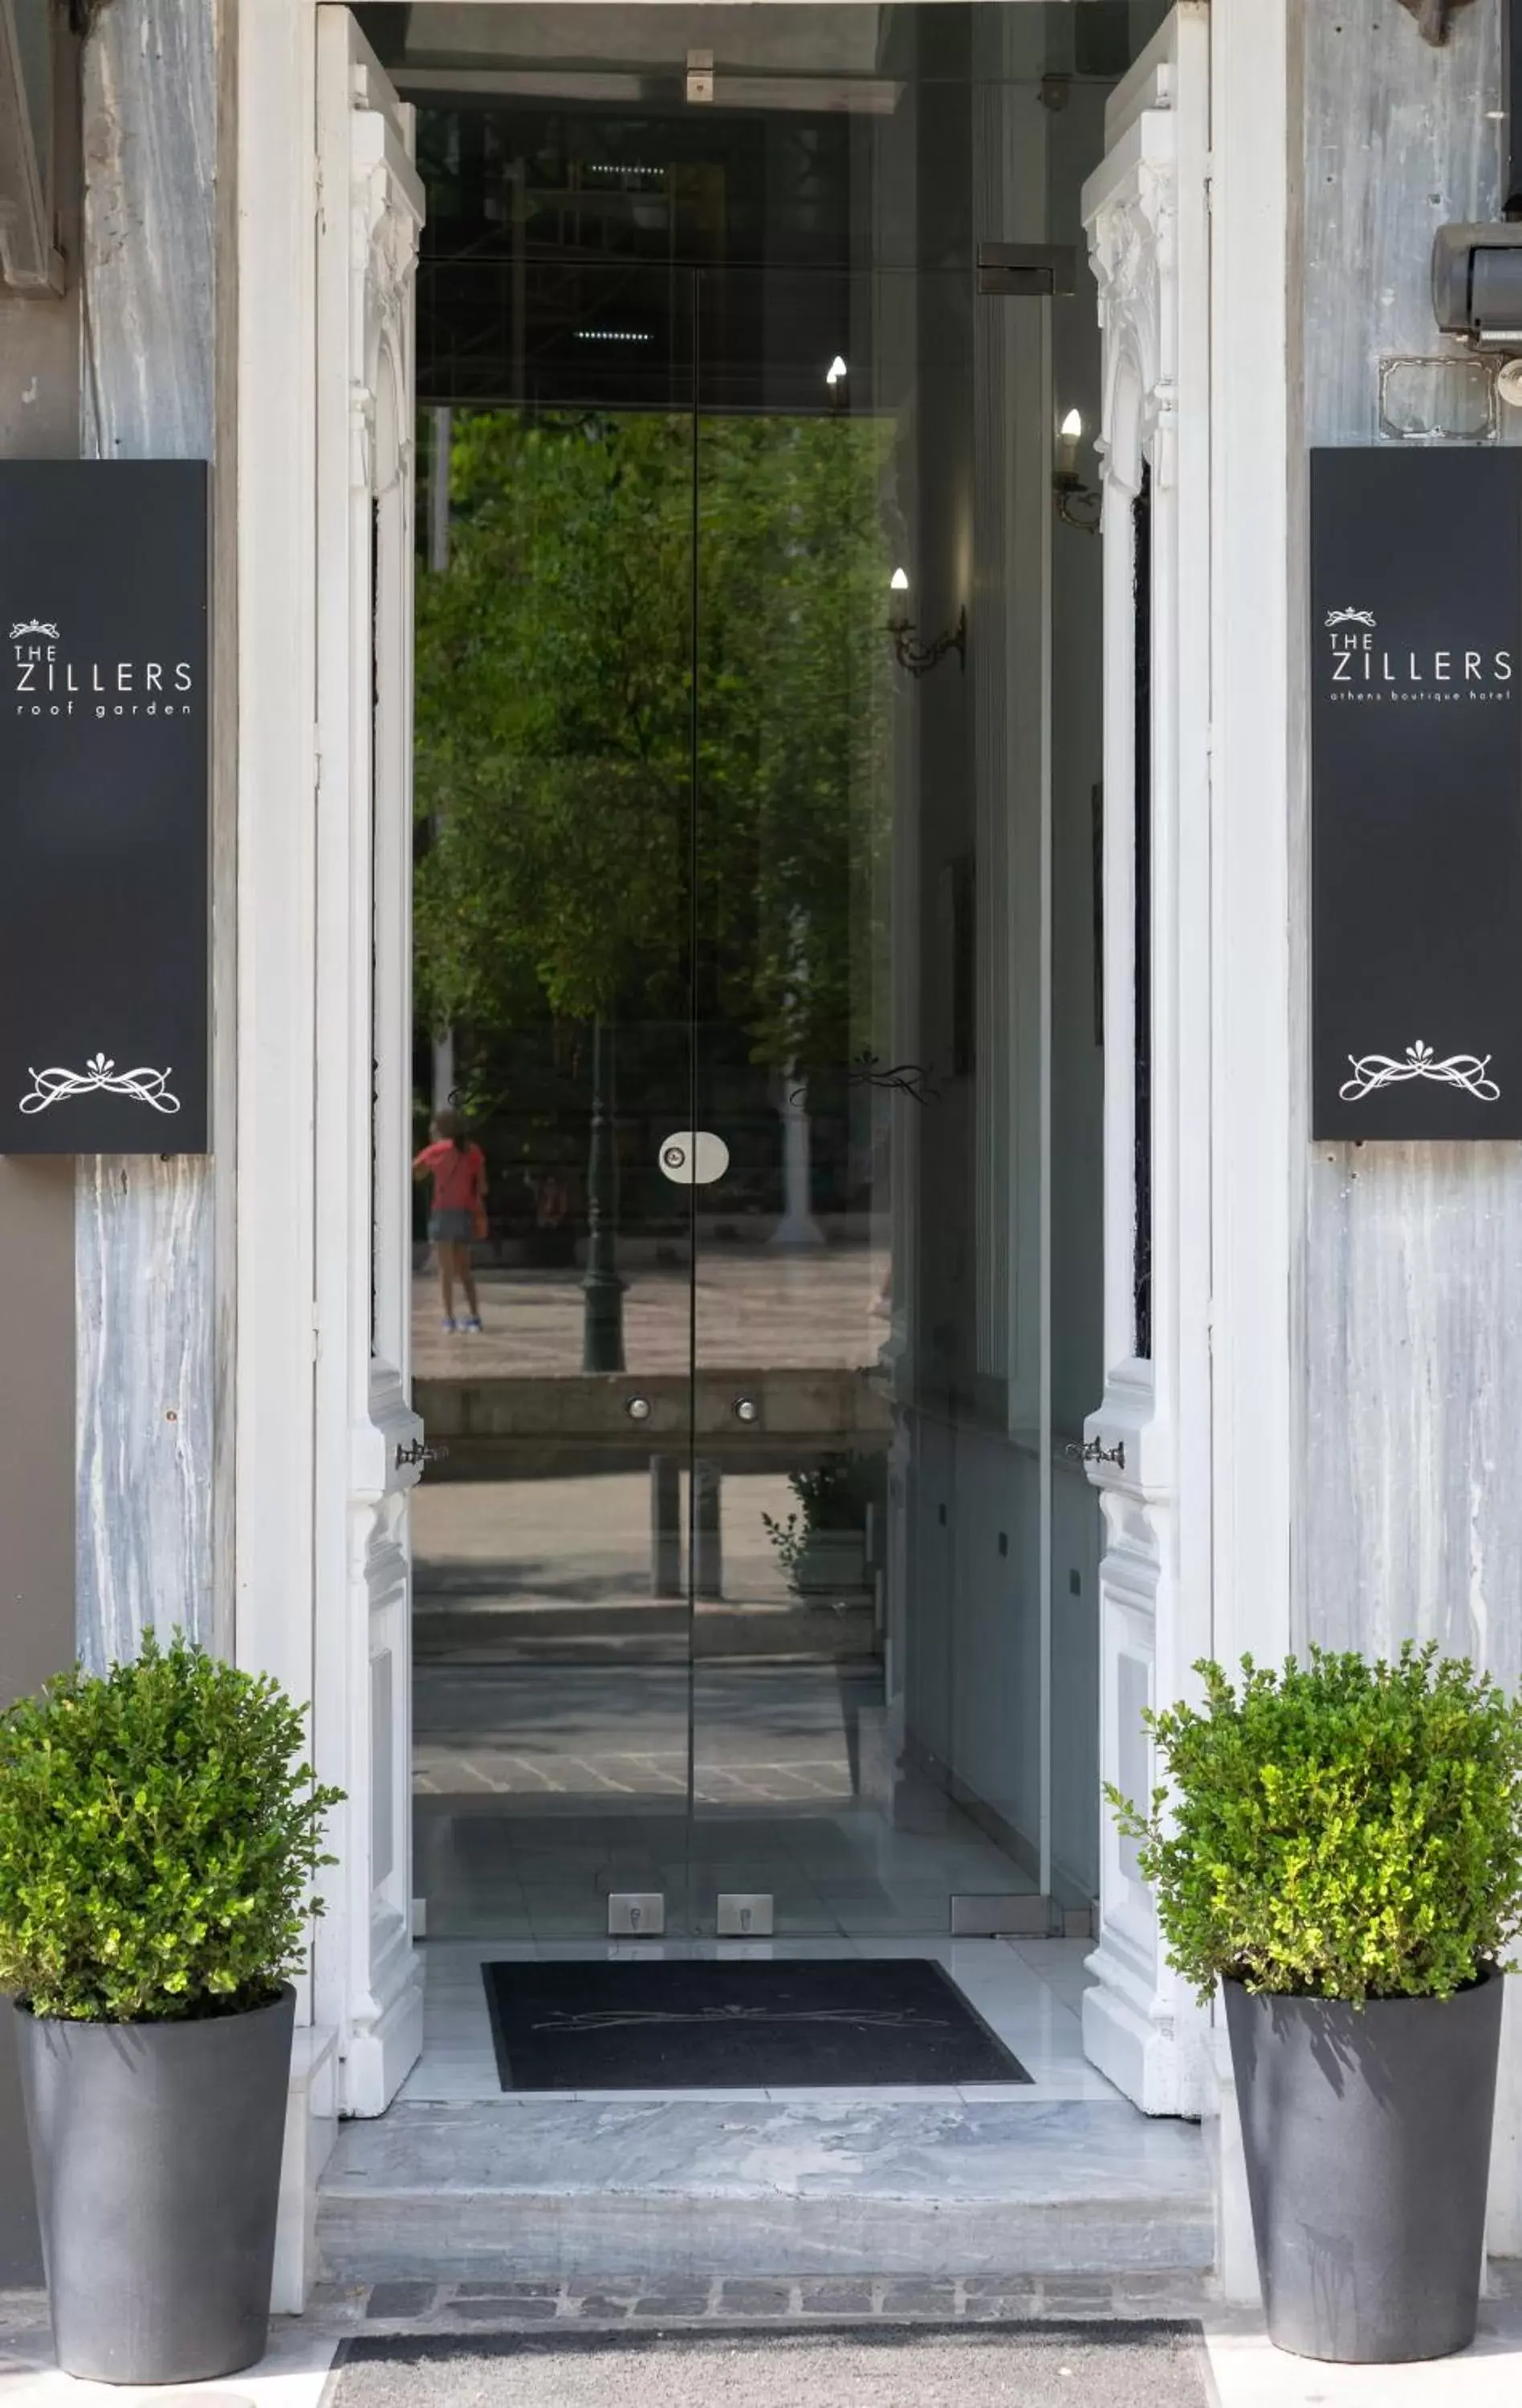 Facade/entrance in The Zillers Boutique Hotel